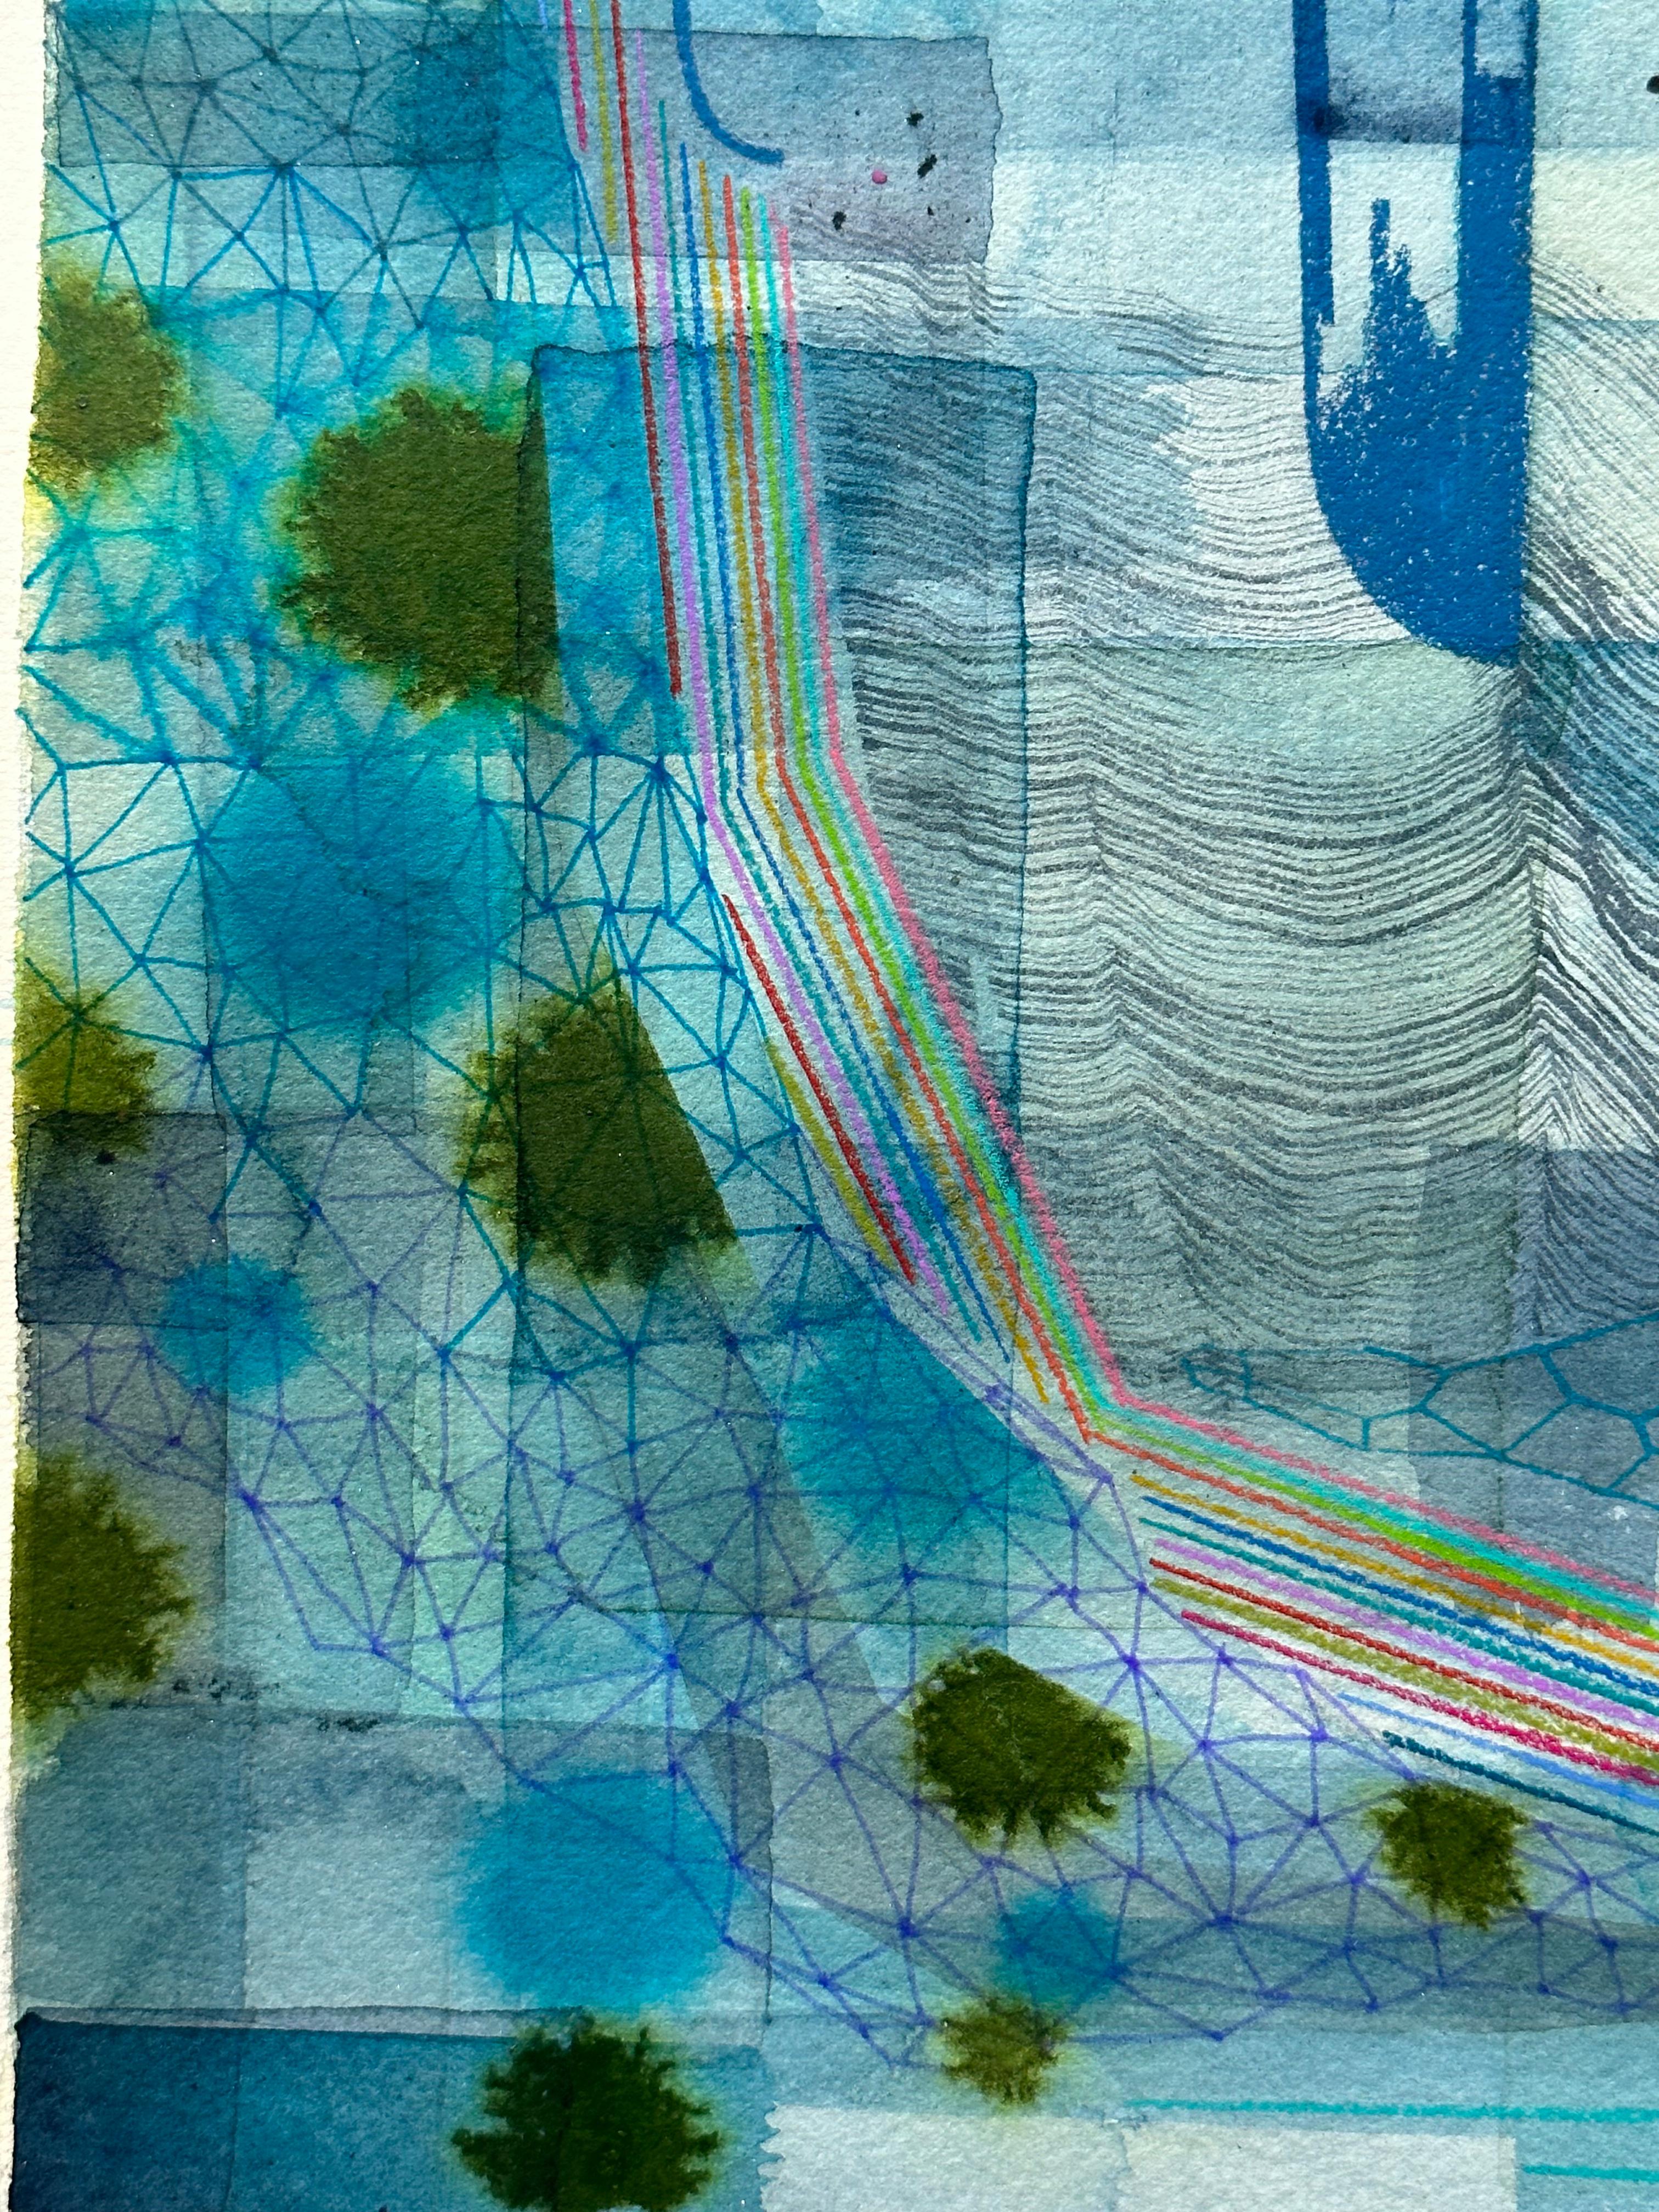 Carefully ordered patterns and geometric shapes in indigo, navy blue and olive green with delicate prismatic rainbow lines complement a soft grayish blue background. Signed on verso.

Exploring a world beyond tangible reality, Brown searches for